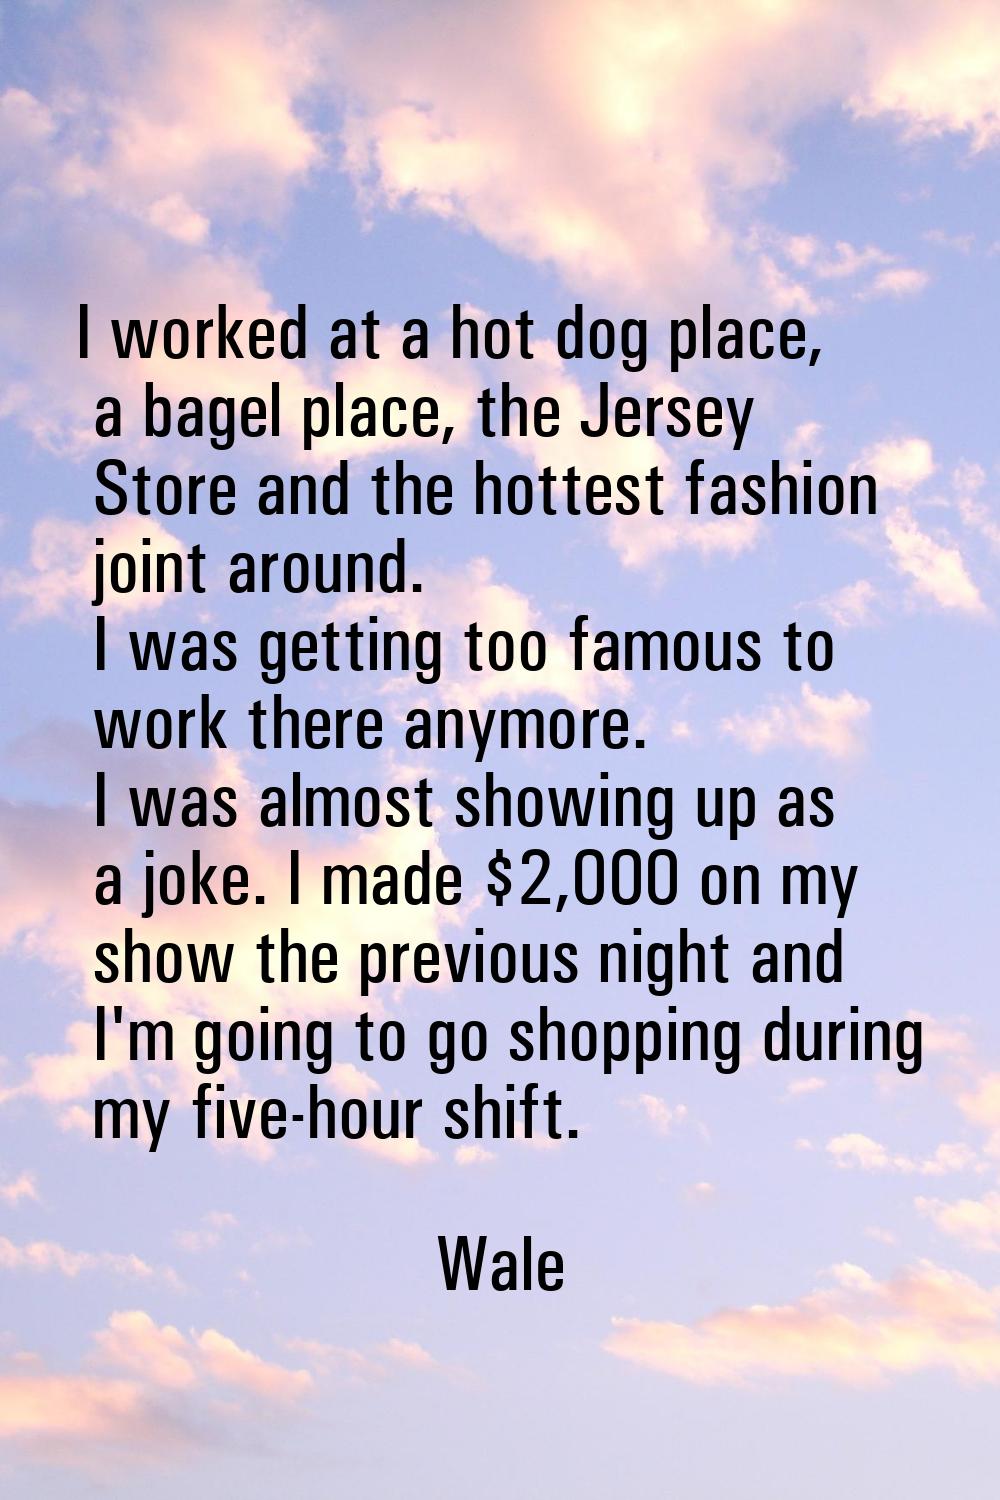 I worked at a hot dog place, a bagel place, the Jersey Store and the hottest fashion joint around. 